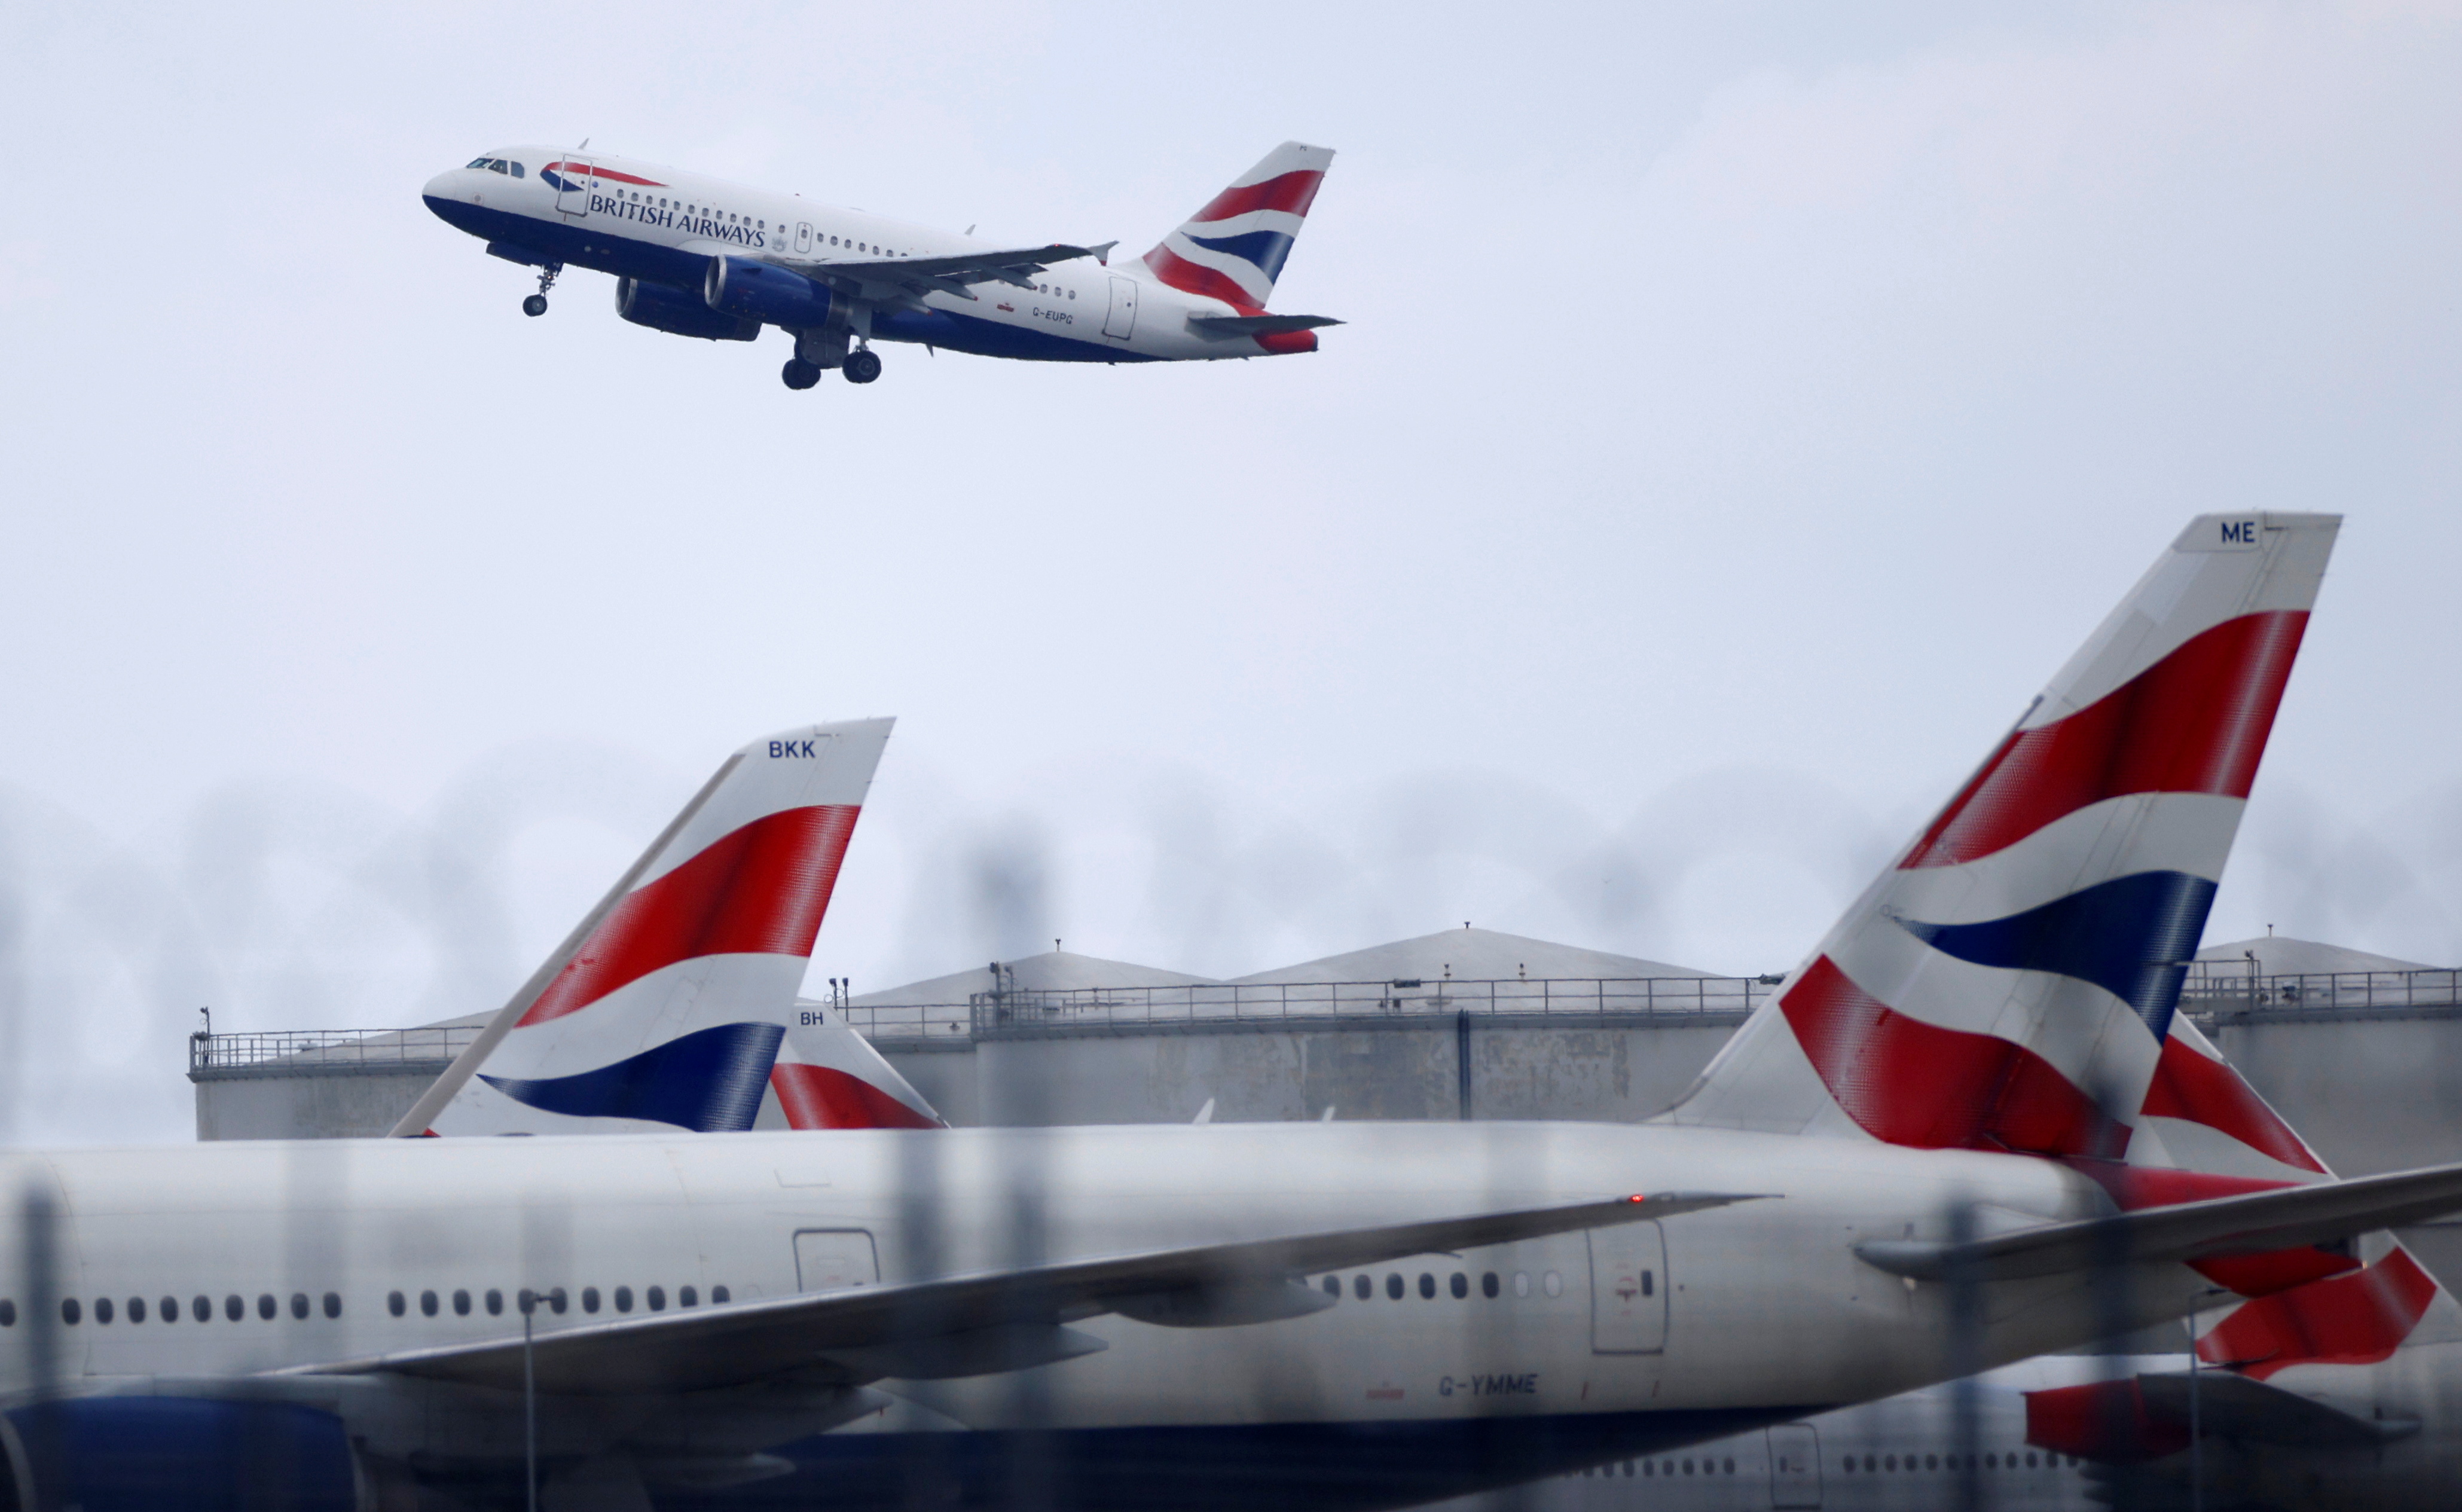 BA Airbus A319 aircraft takes off from Heathrow Airport in London